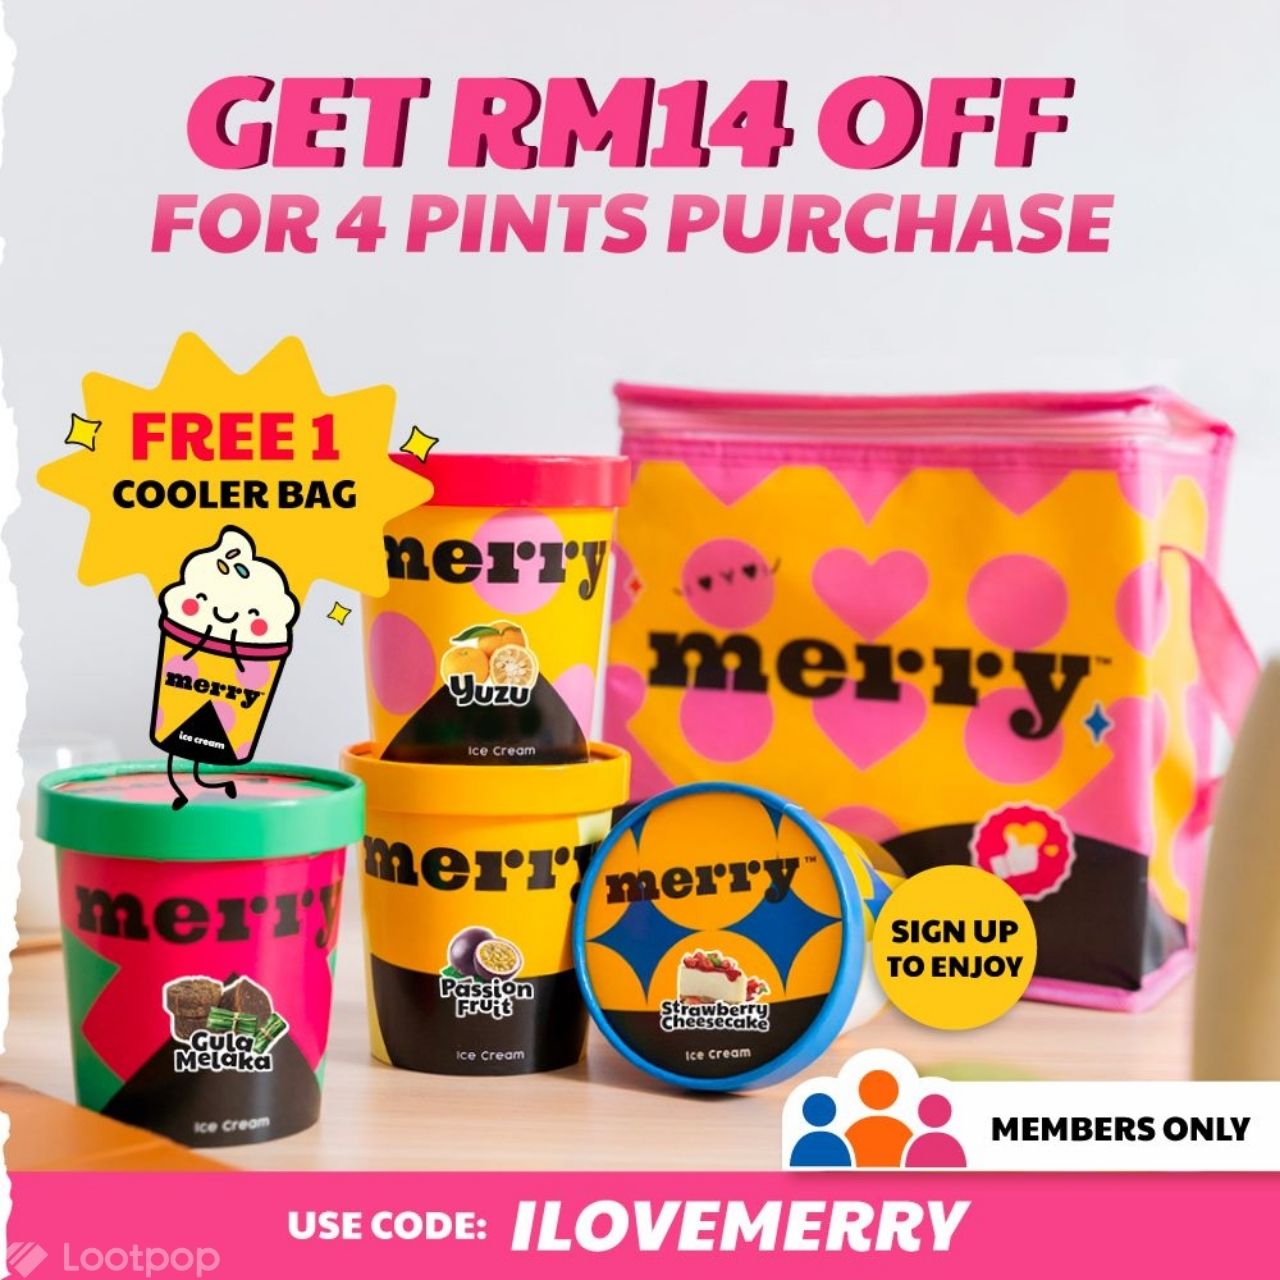 RM14 Cash Rebate and FREE Cooler Bag from Merry Ice Cream